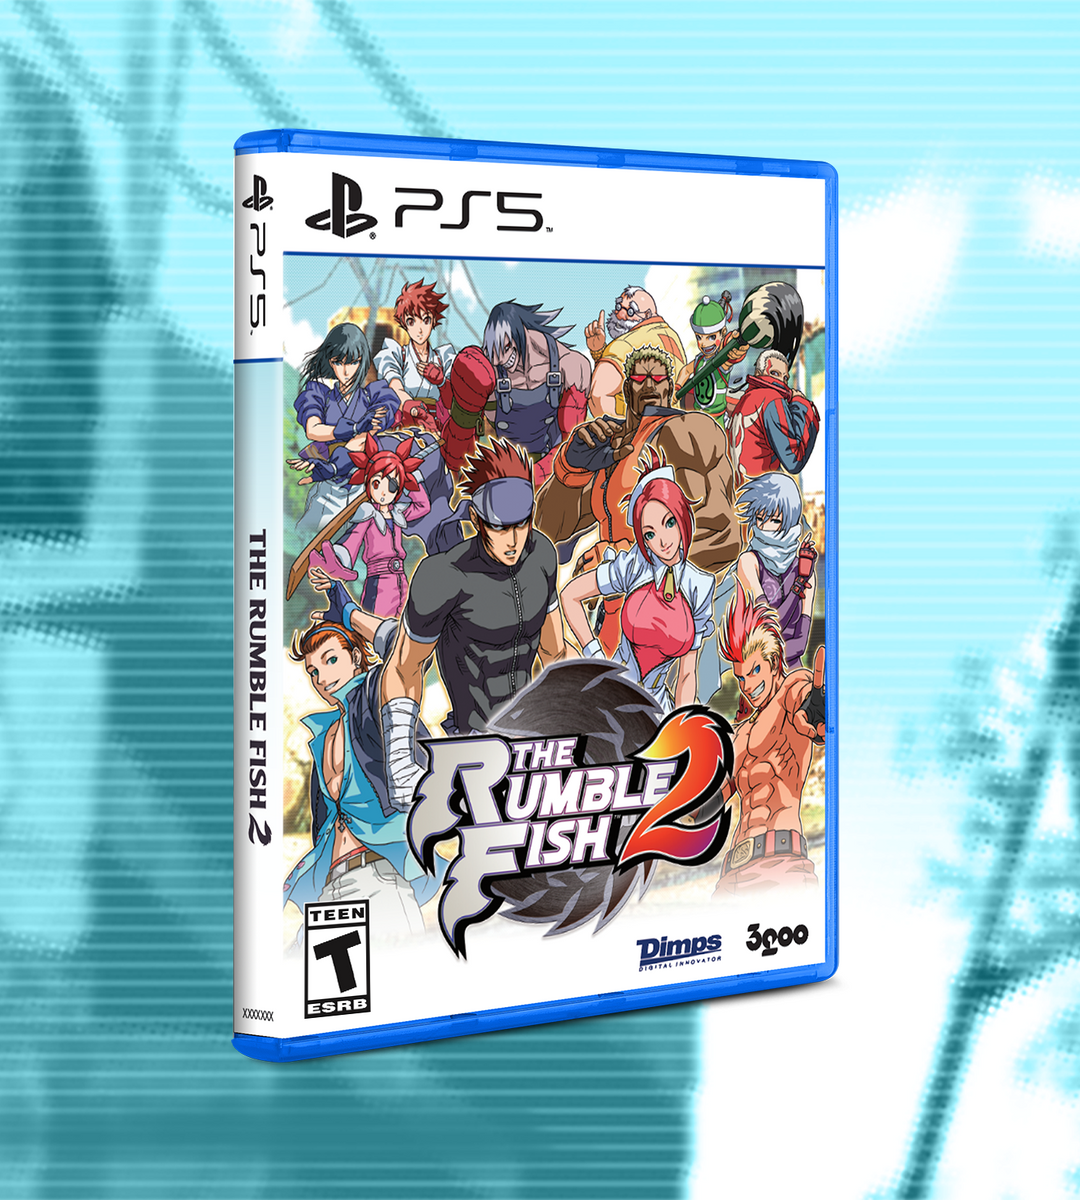 The Rumble Fish 2 (PS5) – Limited Run Games